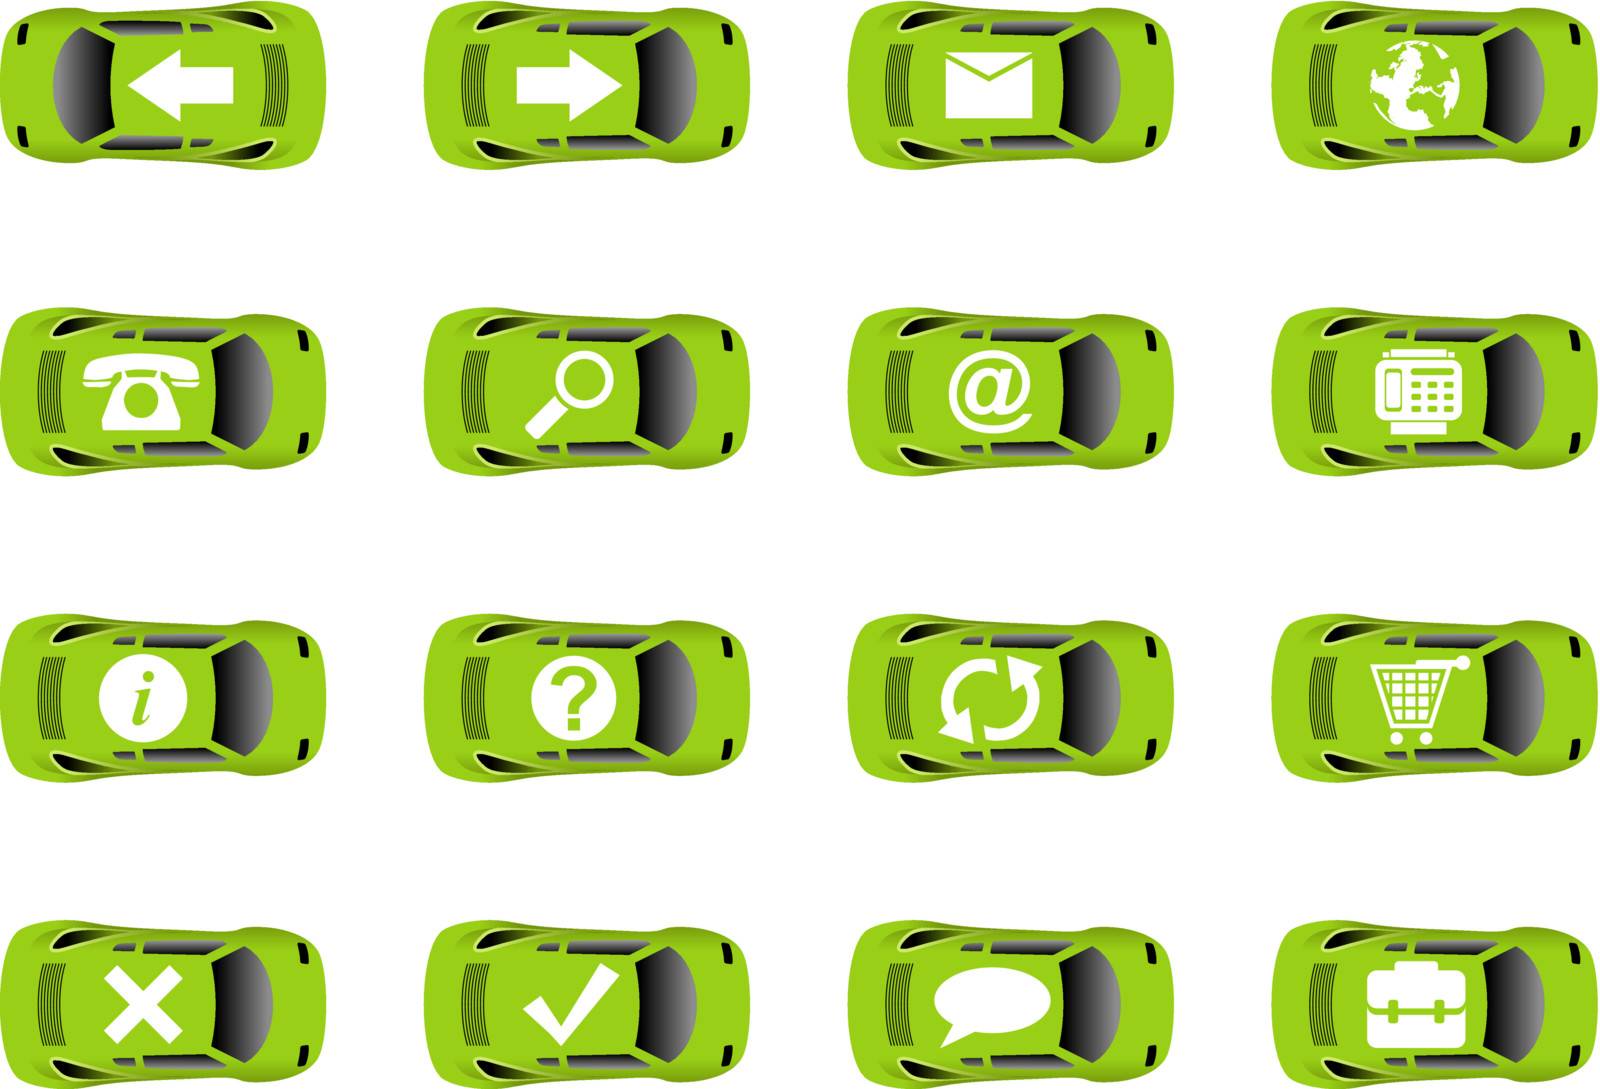 Auto web icons 1 by Guanta